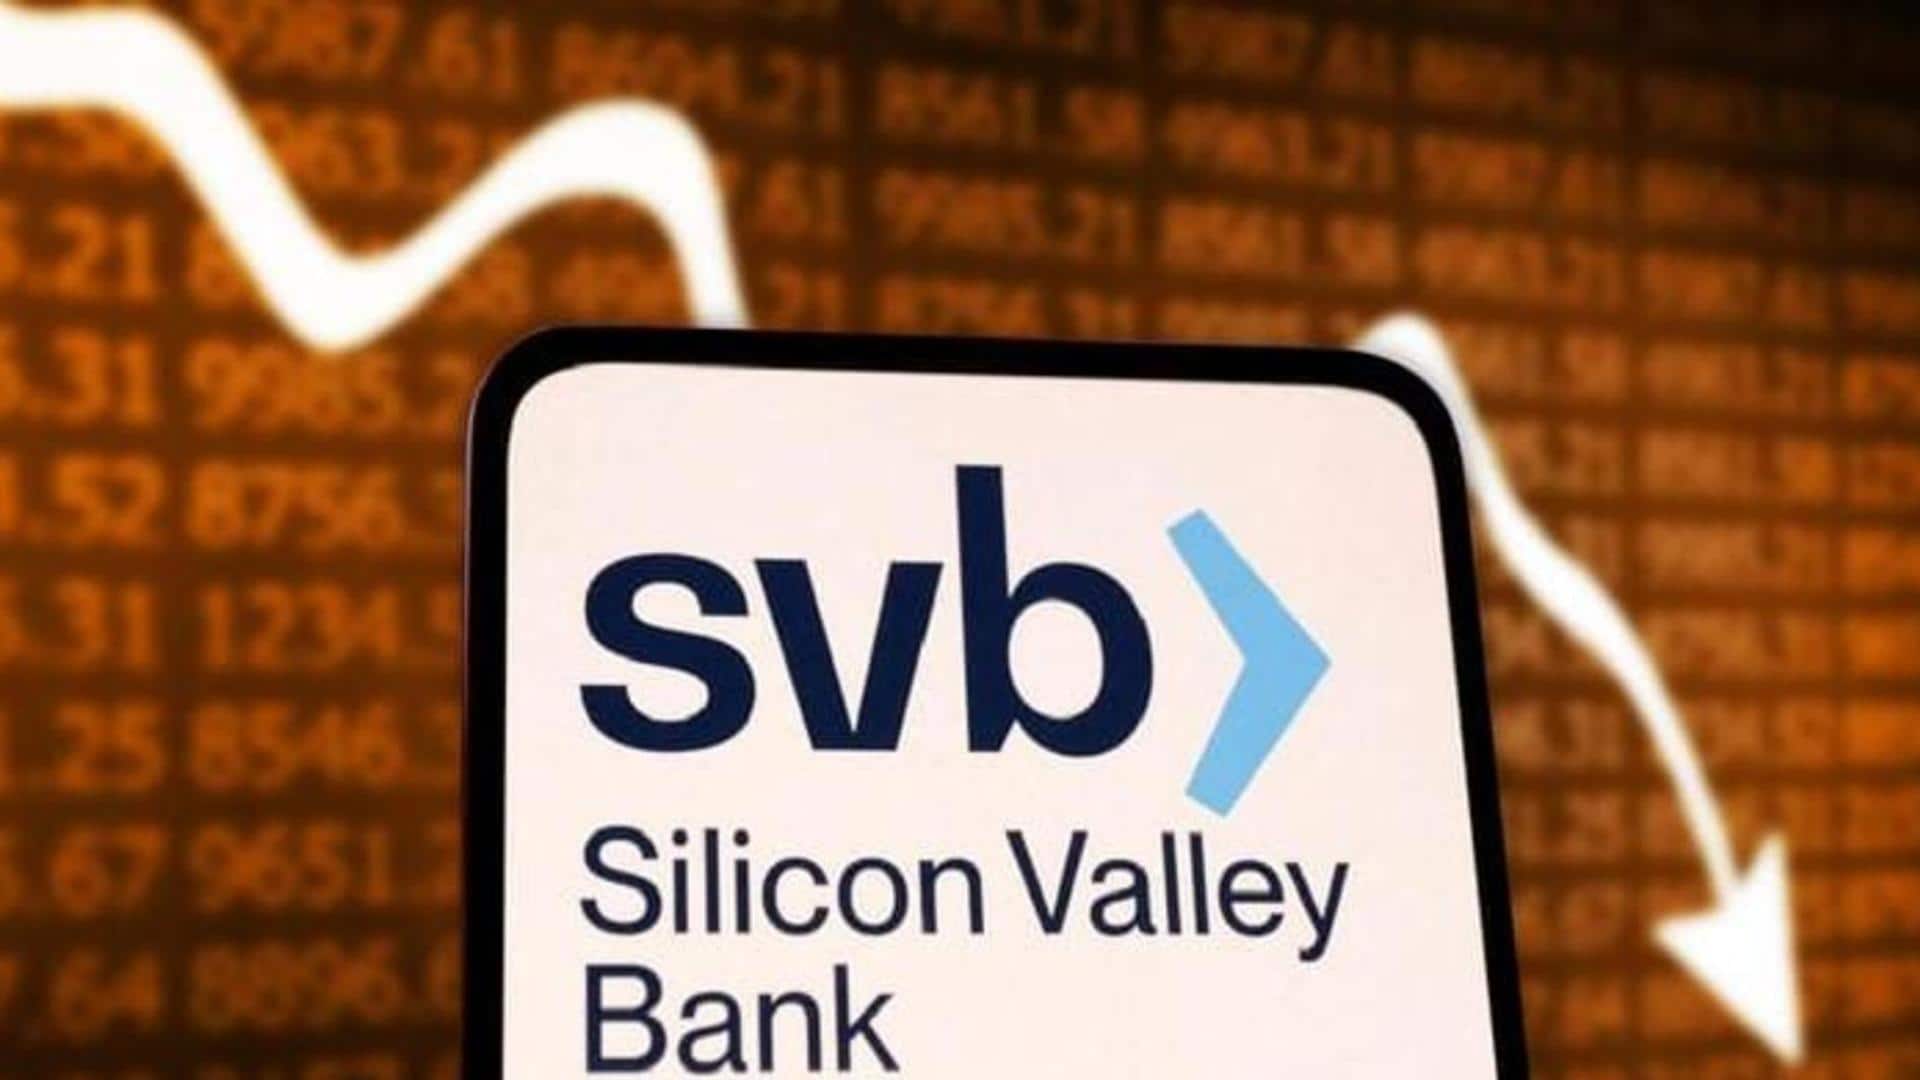 Crisis-hit Silicon Valley Bank acquired by First Citizens bank